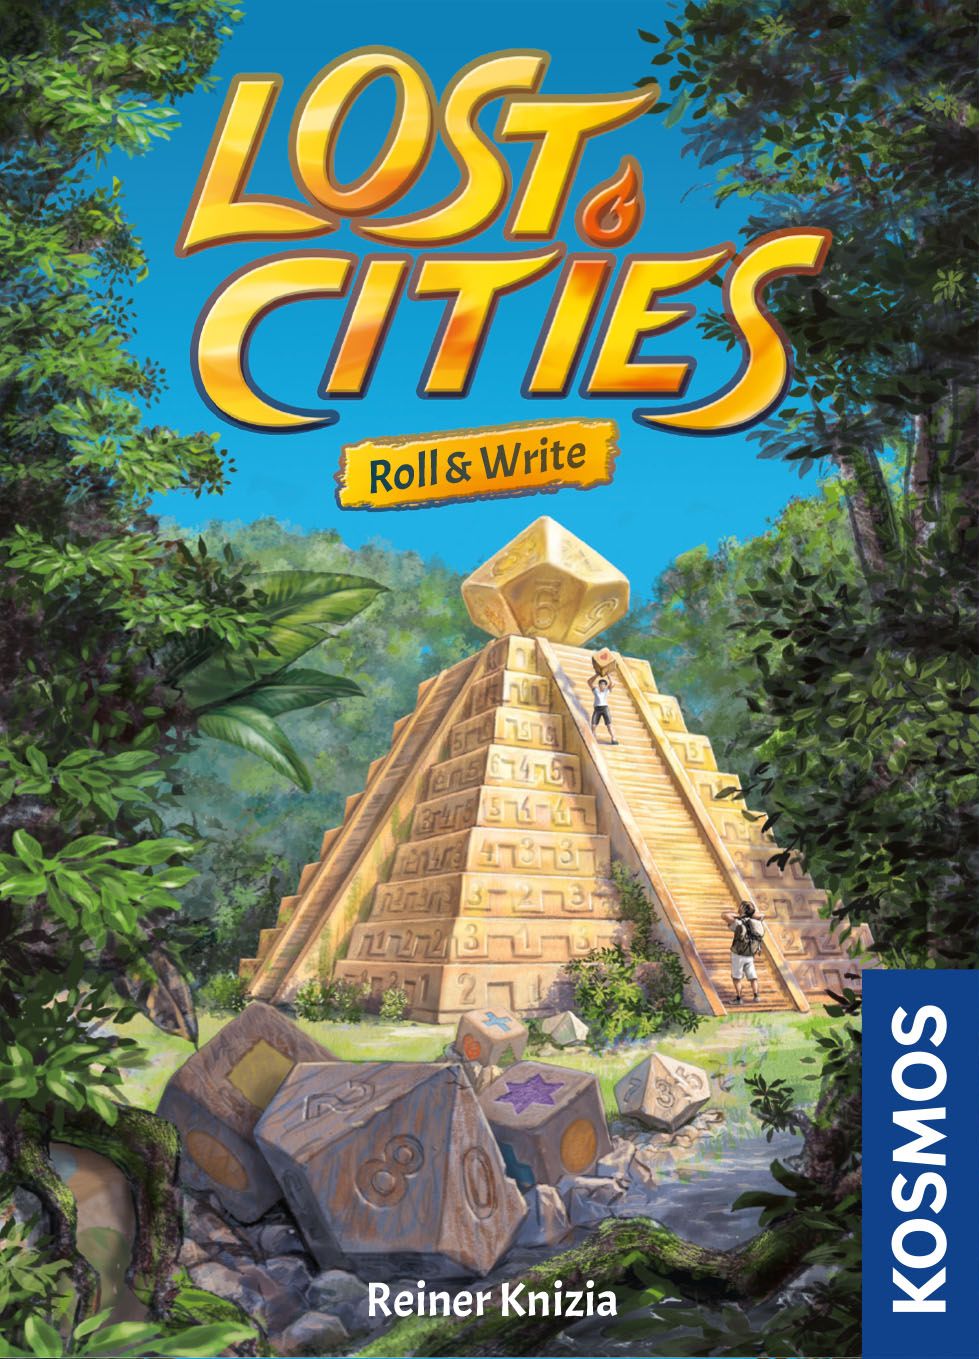 Lost Cities: Roll and Write - DENTED Board Games Kosmos 